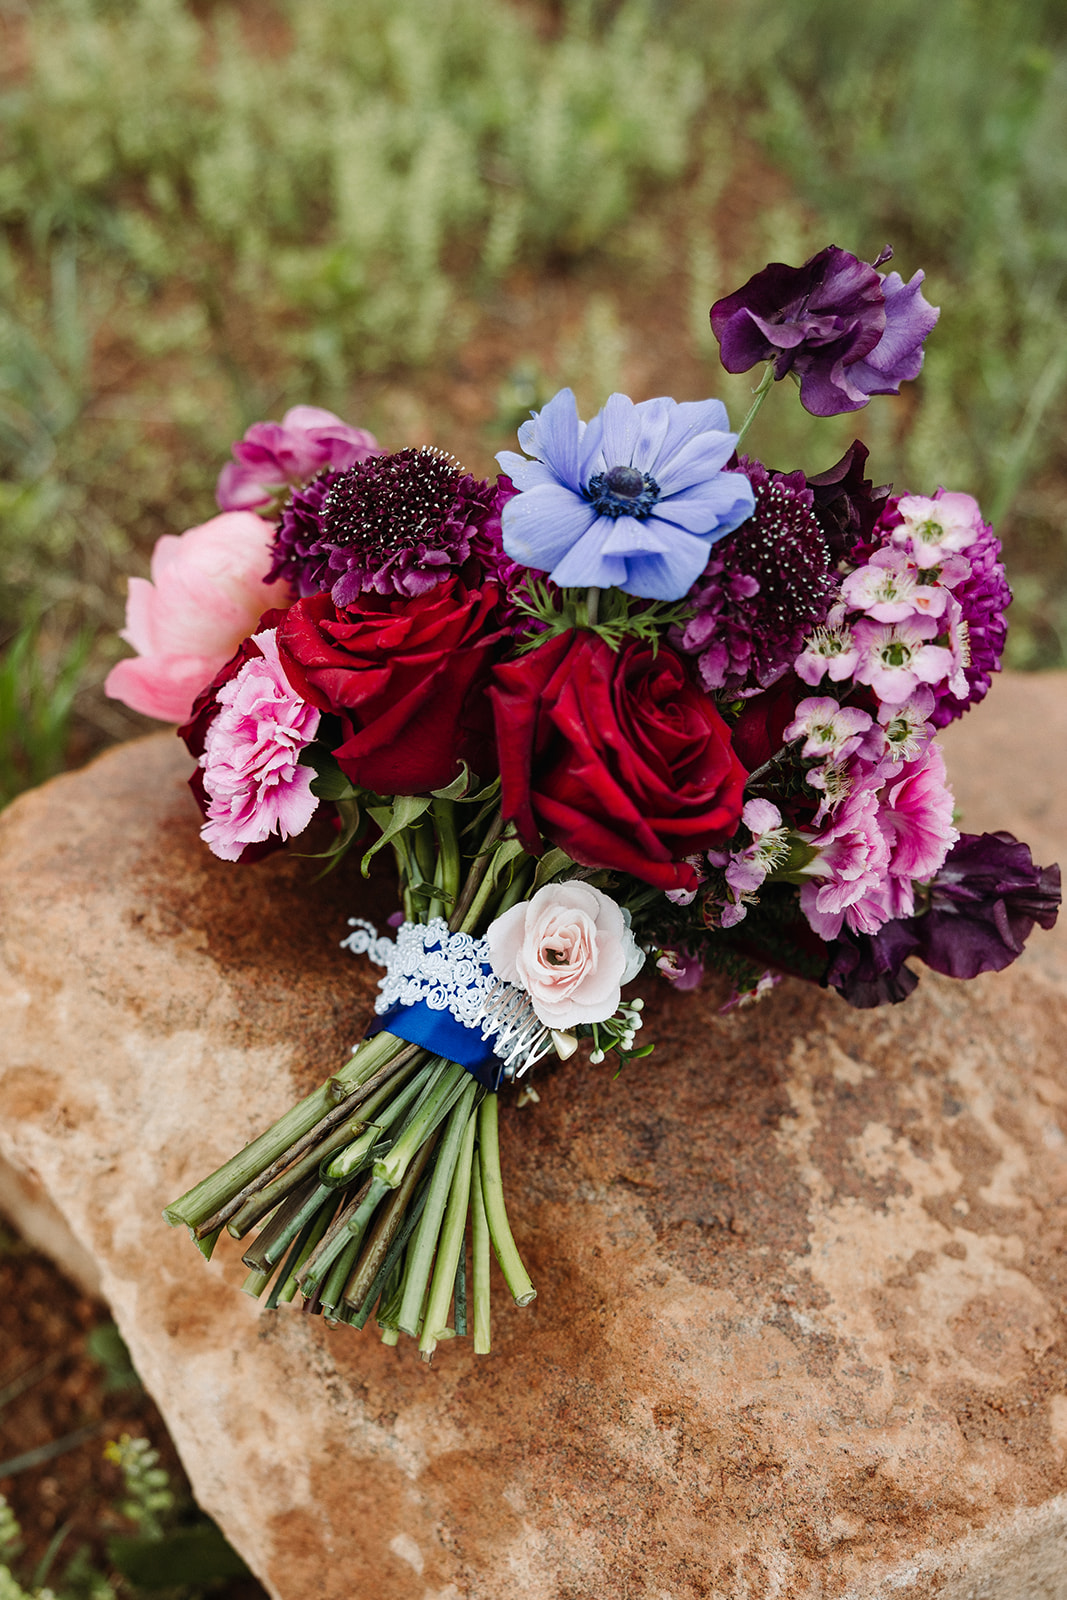 A bold bouquet with rich reds, purples, blues, and pinks. The stem is wrapped in a blue ribbon with personal touches.